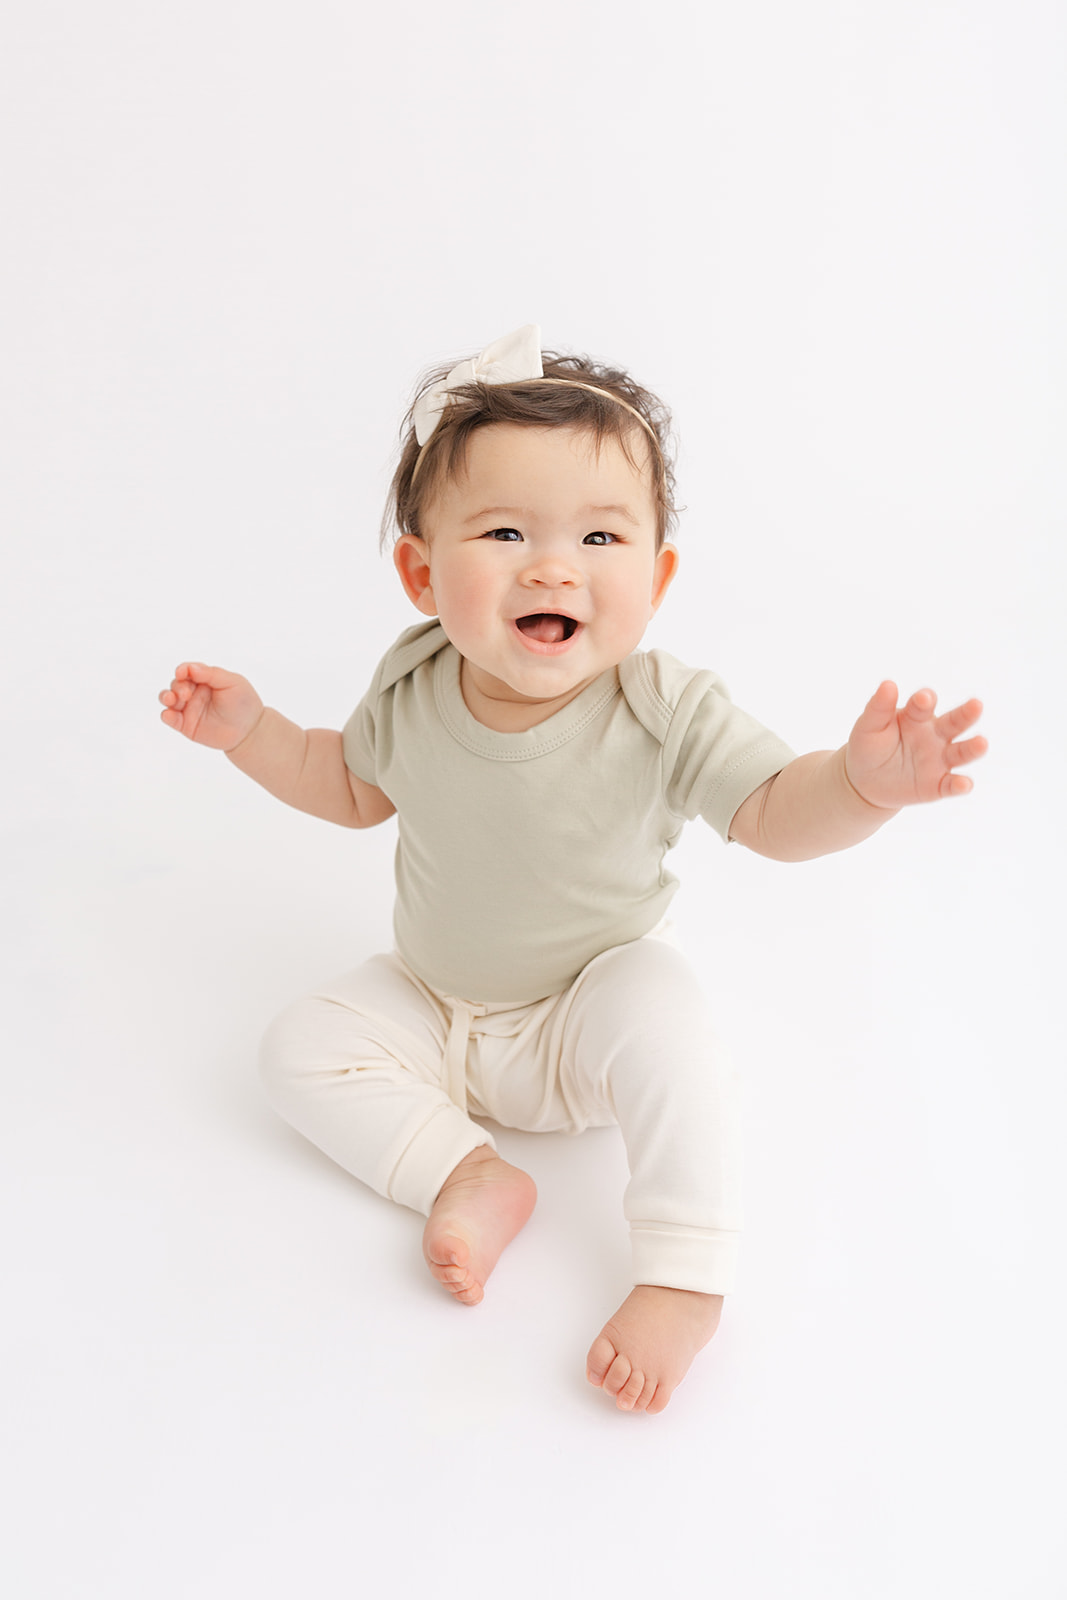 A happy toddler girl smiles while playing on the floor of a studio in a green shirt and white pants